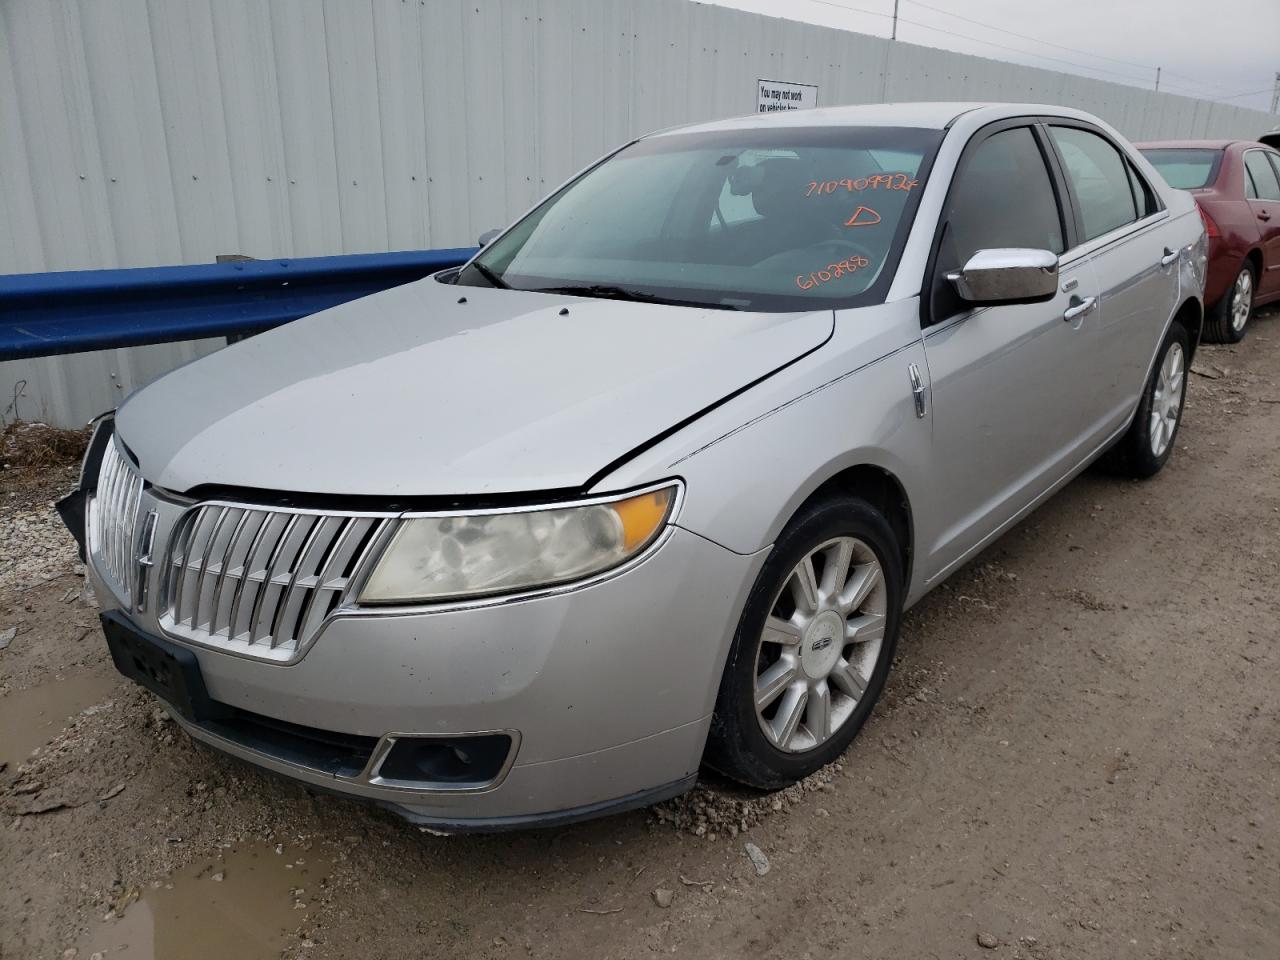 2010 Lincoln MKZ for sale at Copart Pekin, IL Lot #71090*** |  SalvageReseller.com